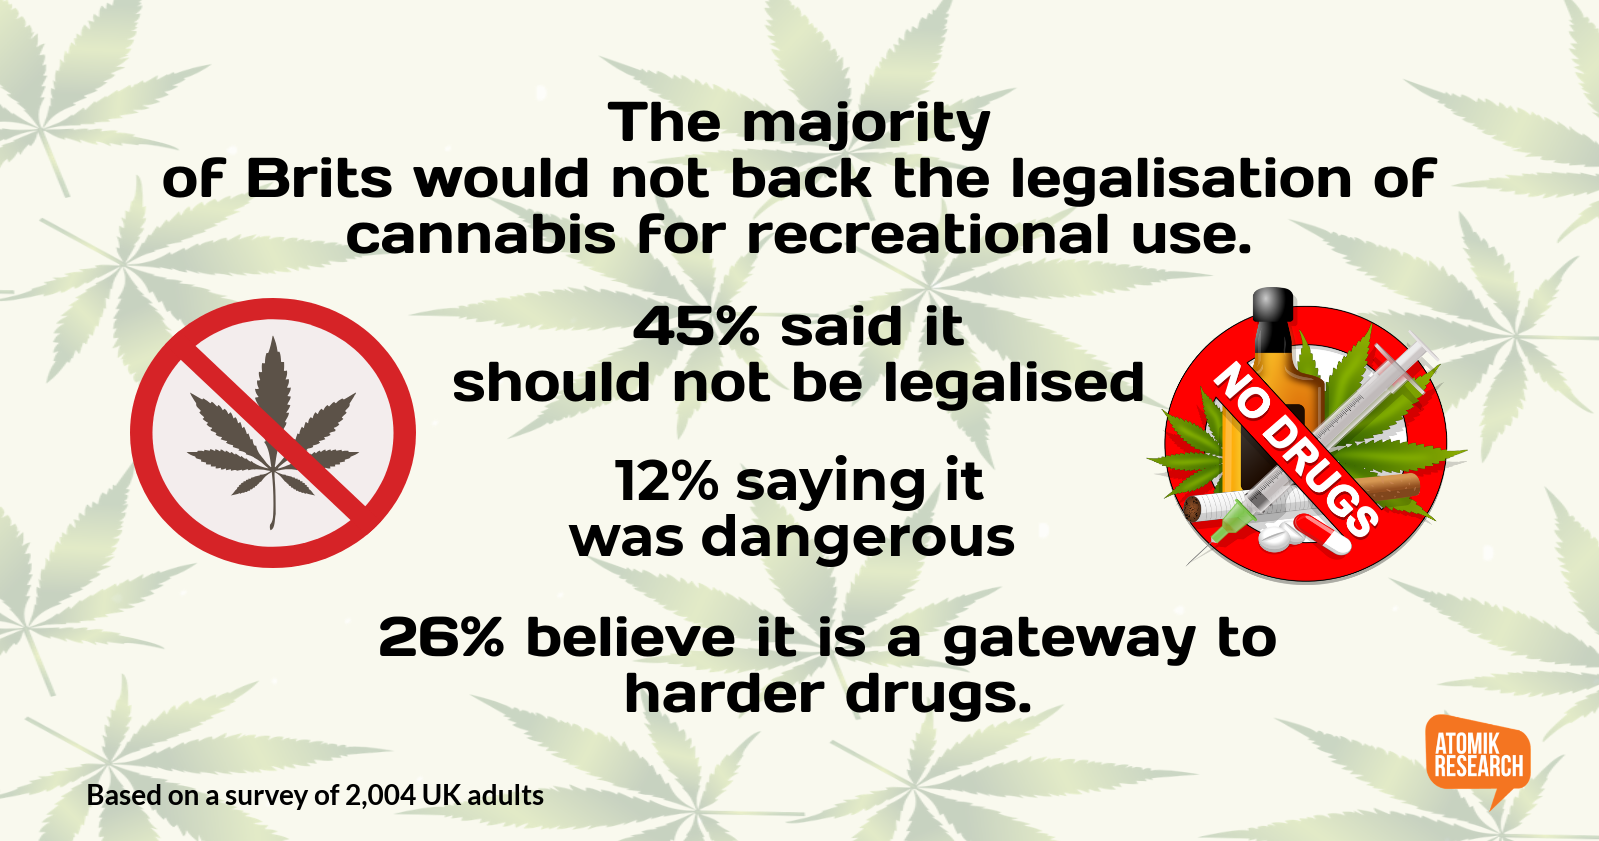 To Legalise or Not To Legalise: The Cannabis Debate